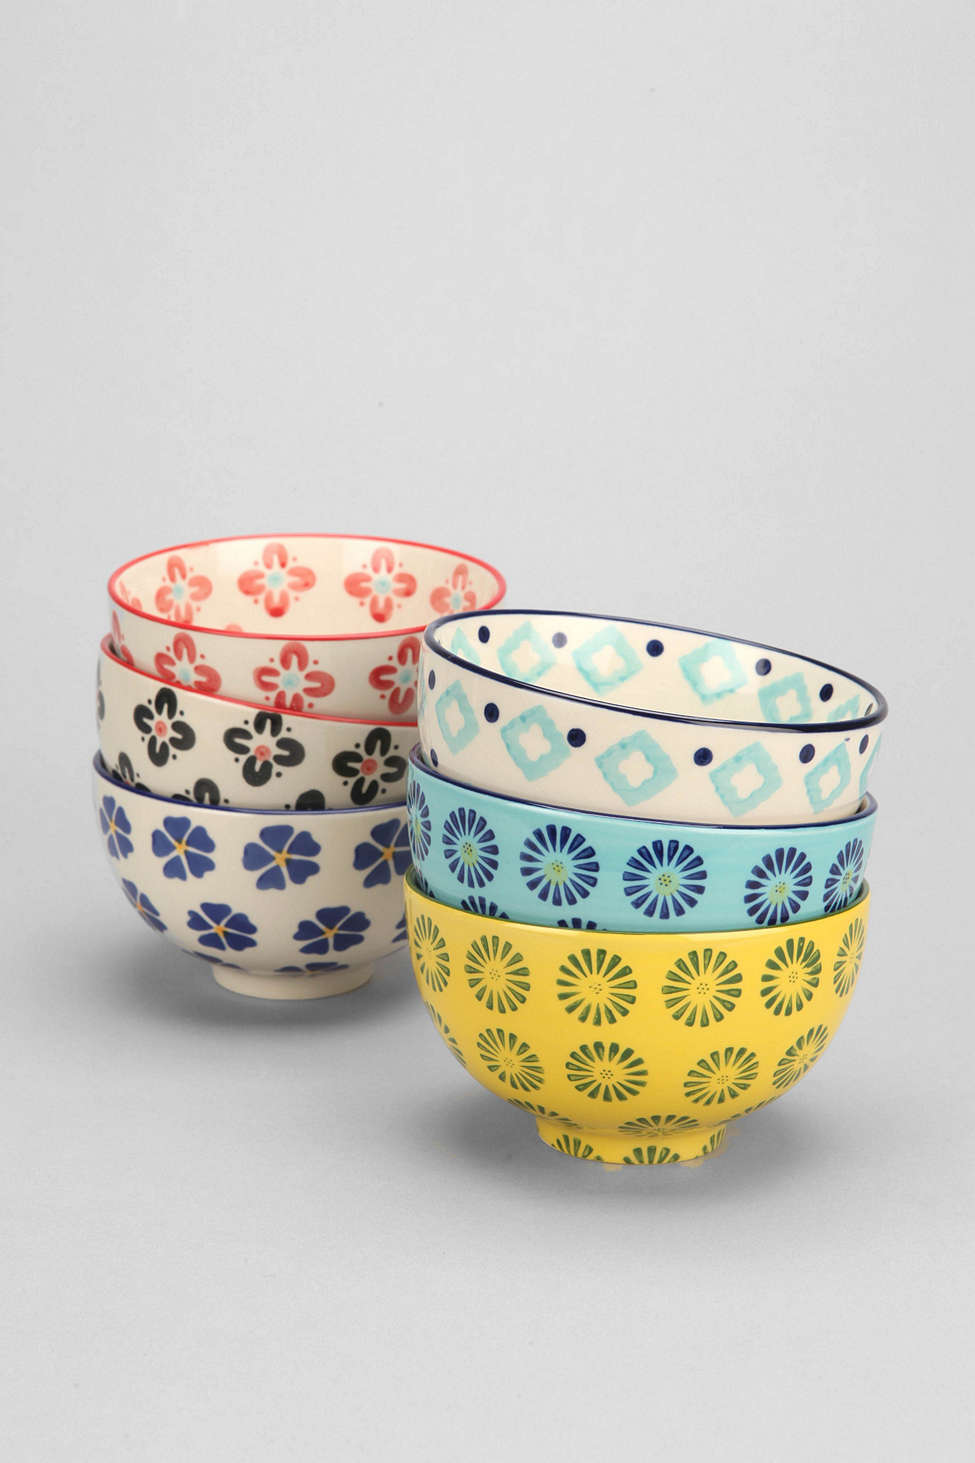 Urban Outfitters Floral Treat Bowls - $39, set of 6